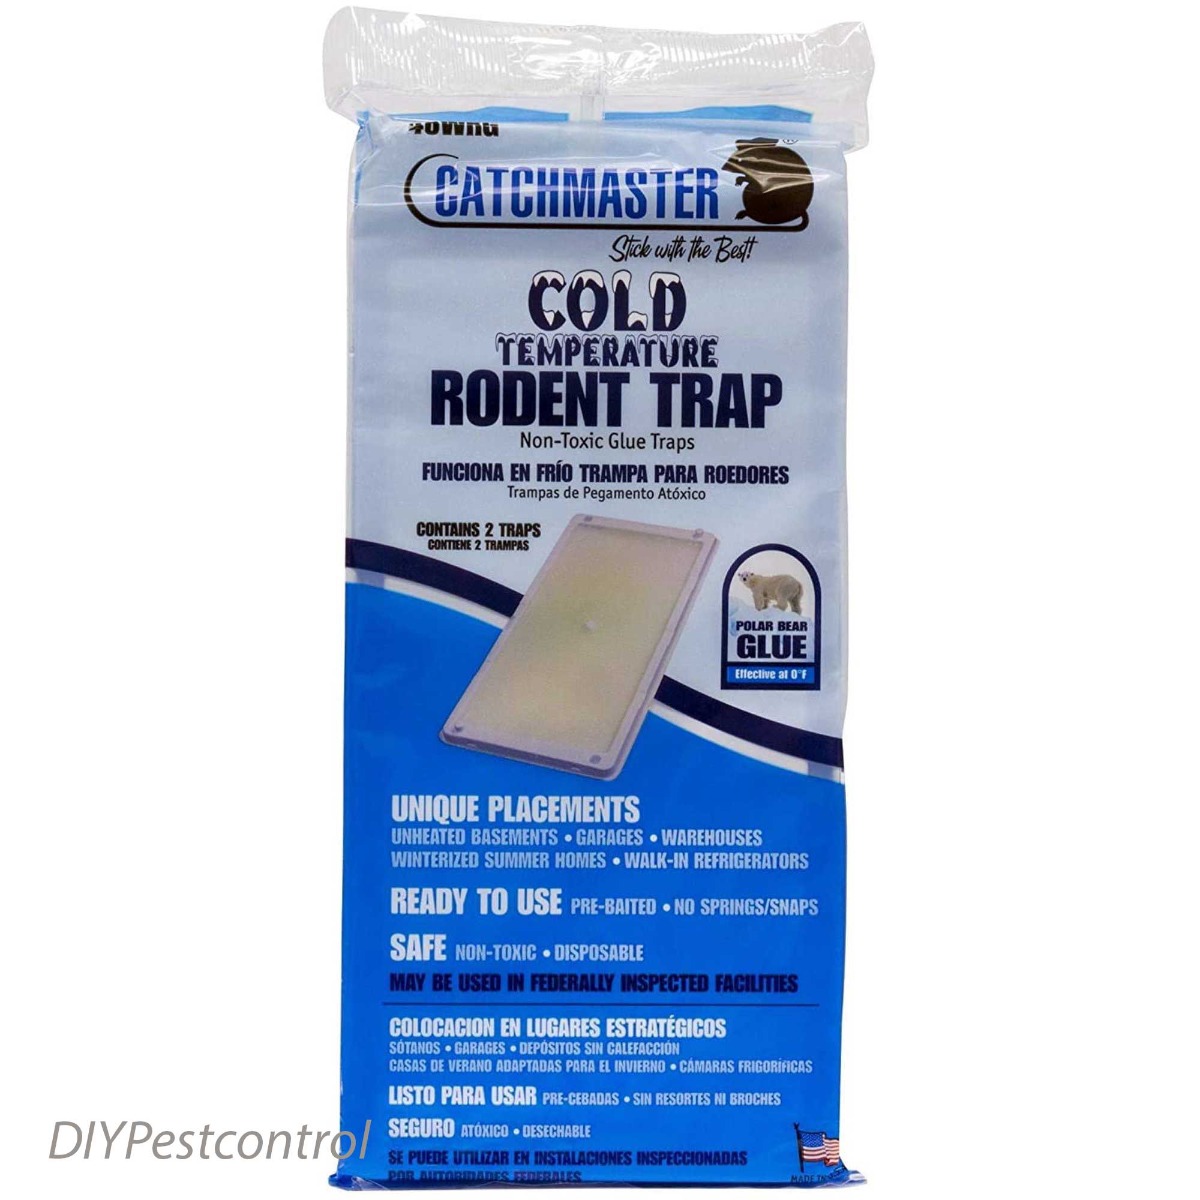 Catchmaster Cold Temperature Rodent Trap -1 Set (2 traps)